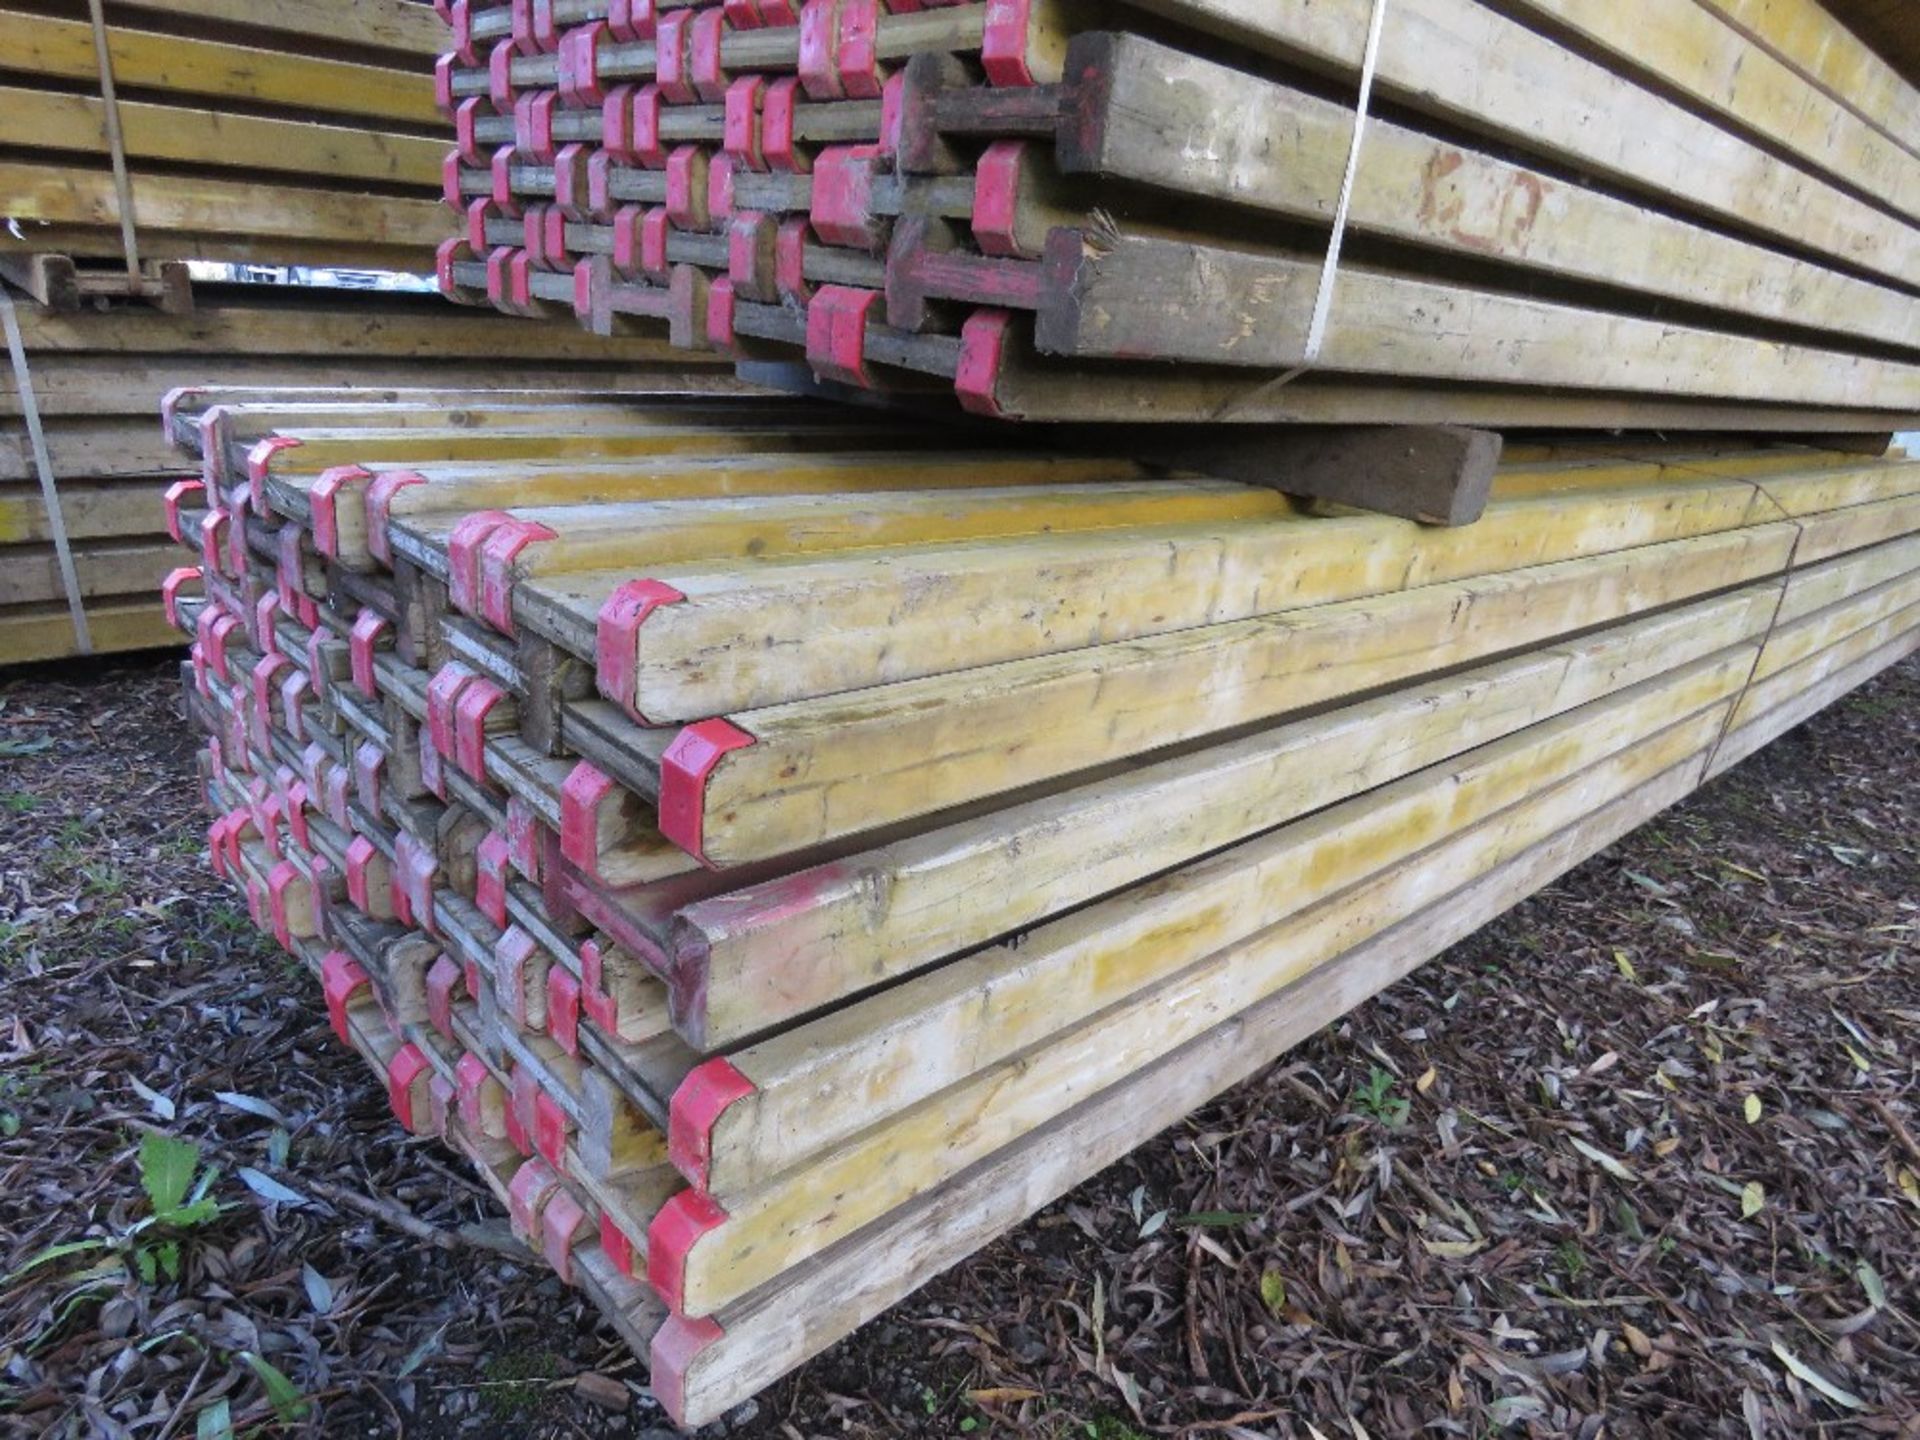 BUNDLE OF I BEAM WOODEN SHUTTERING BEAMS, 50NO APPROX IN THE BUNDLE, 4.5METRE LENGTH. ALSO SUITABLE - Image 3 of 4